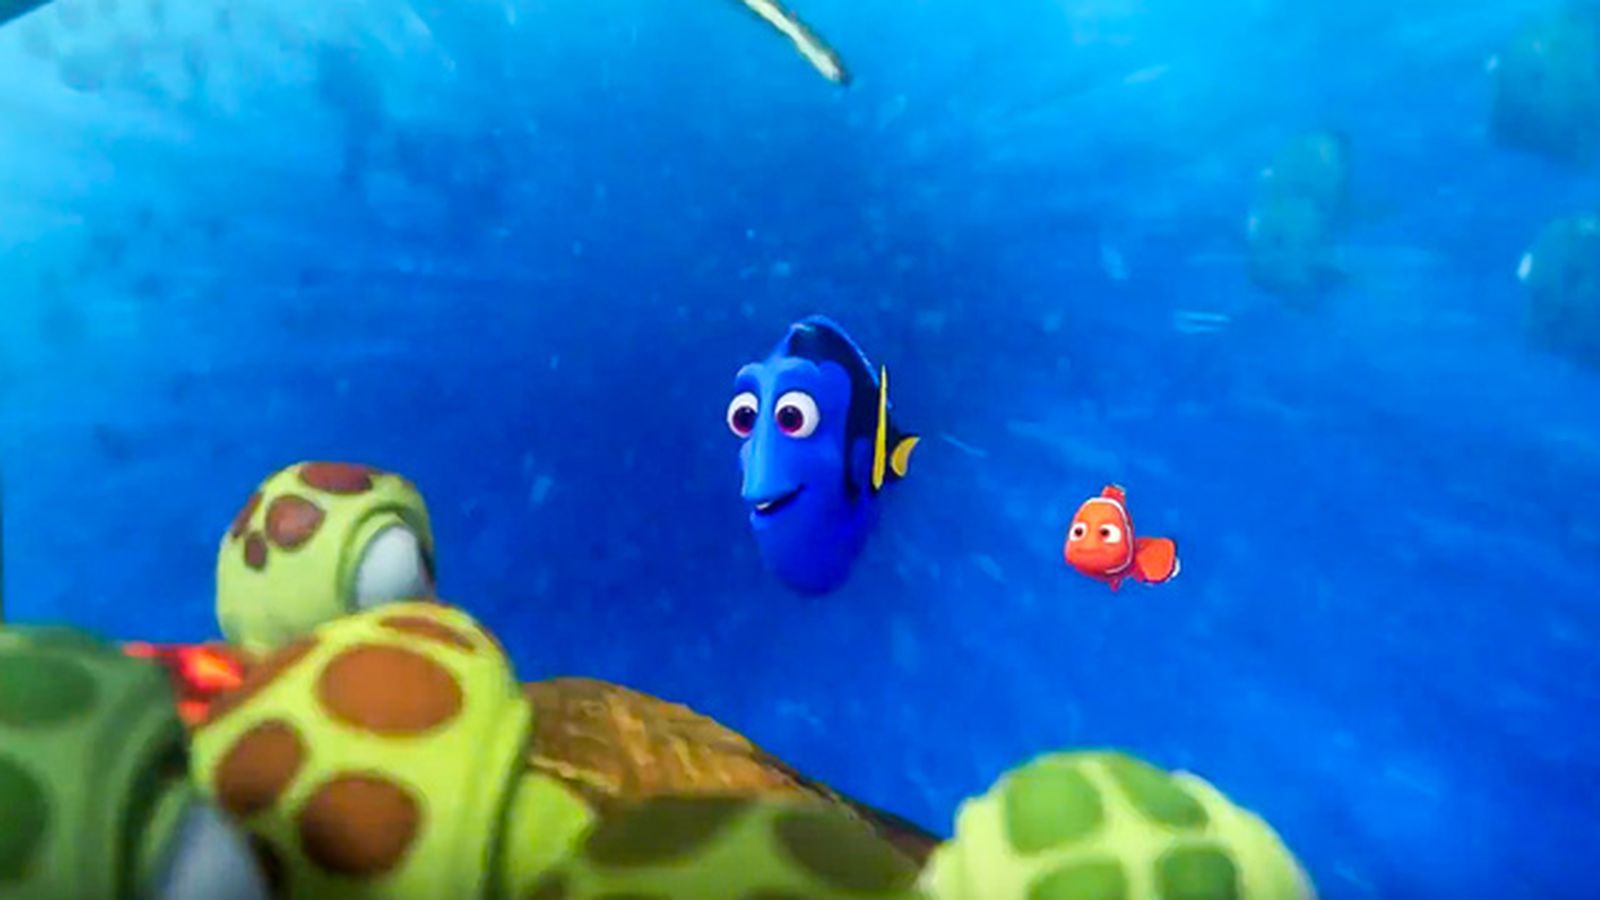 Finding Nemo crew reunites with Crush in new clip from Finding Dory